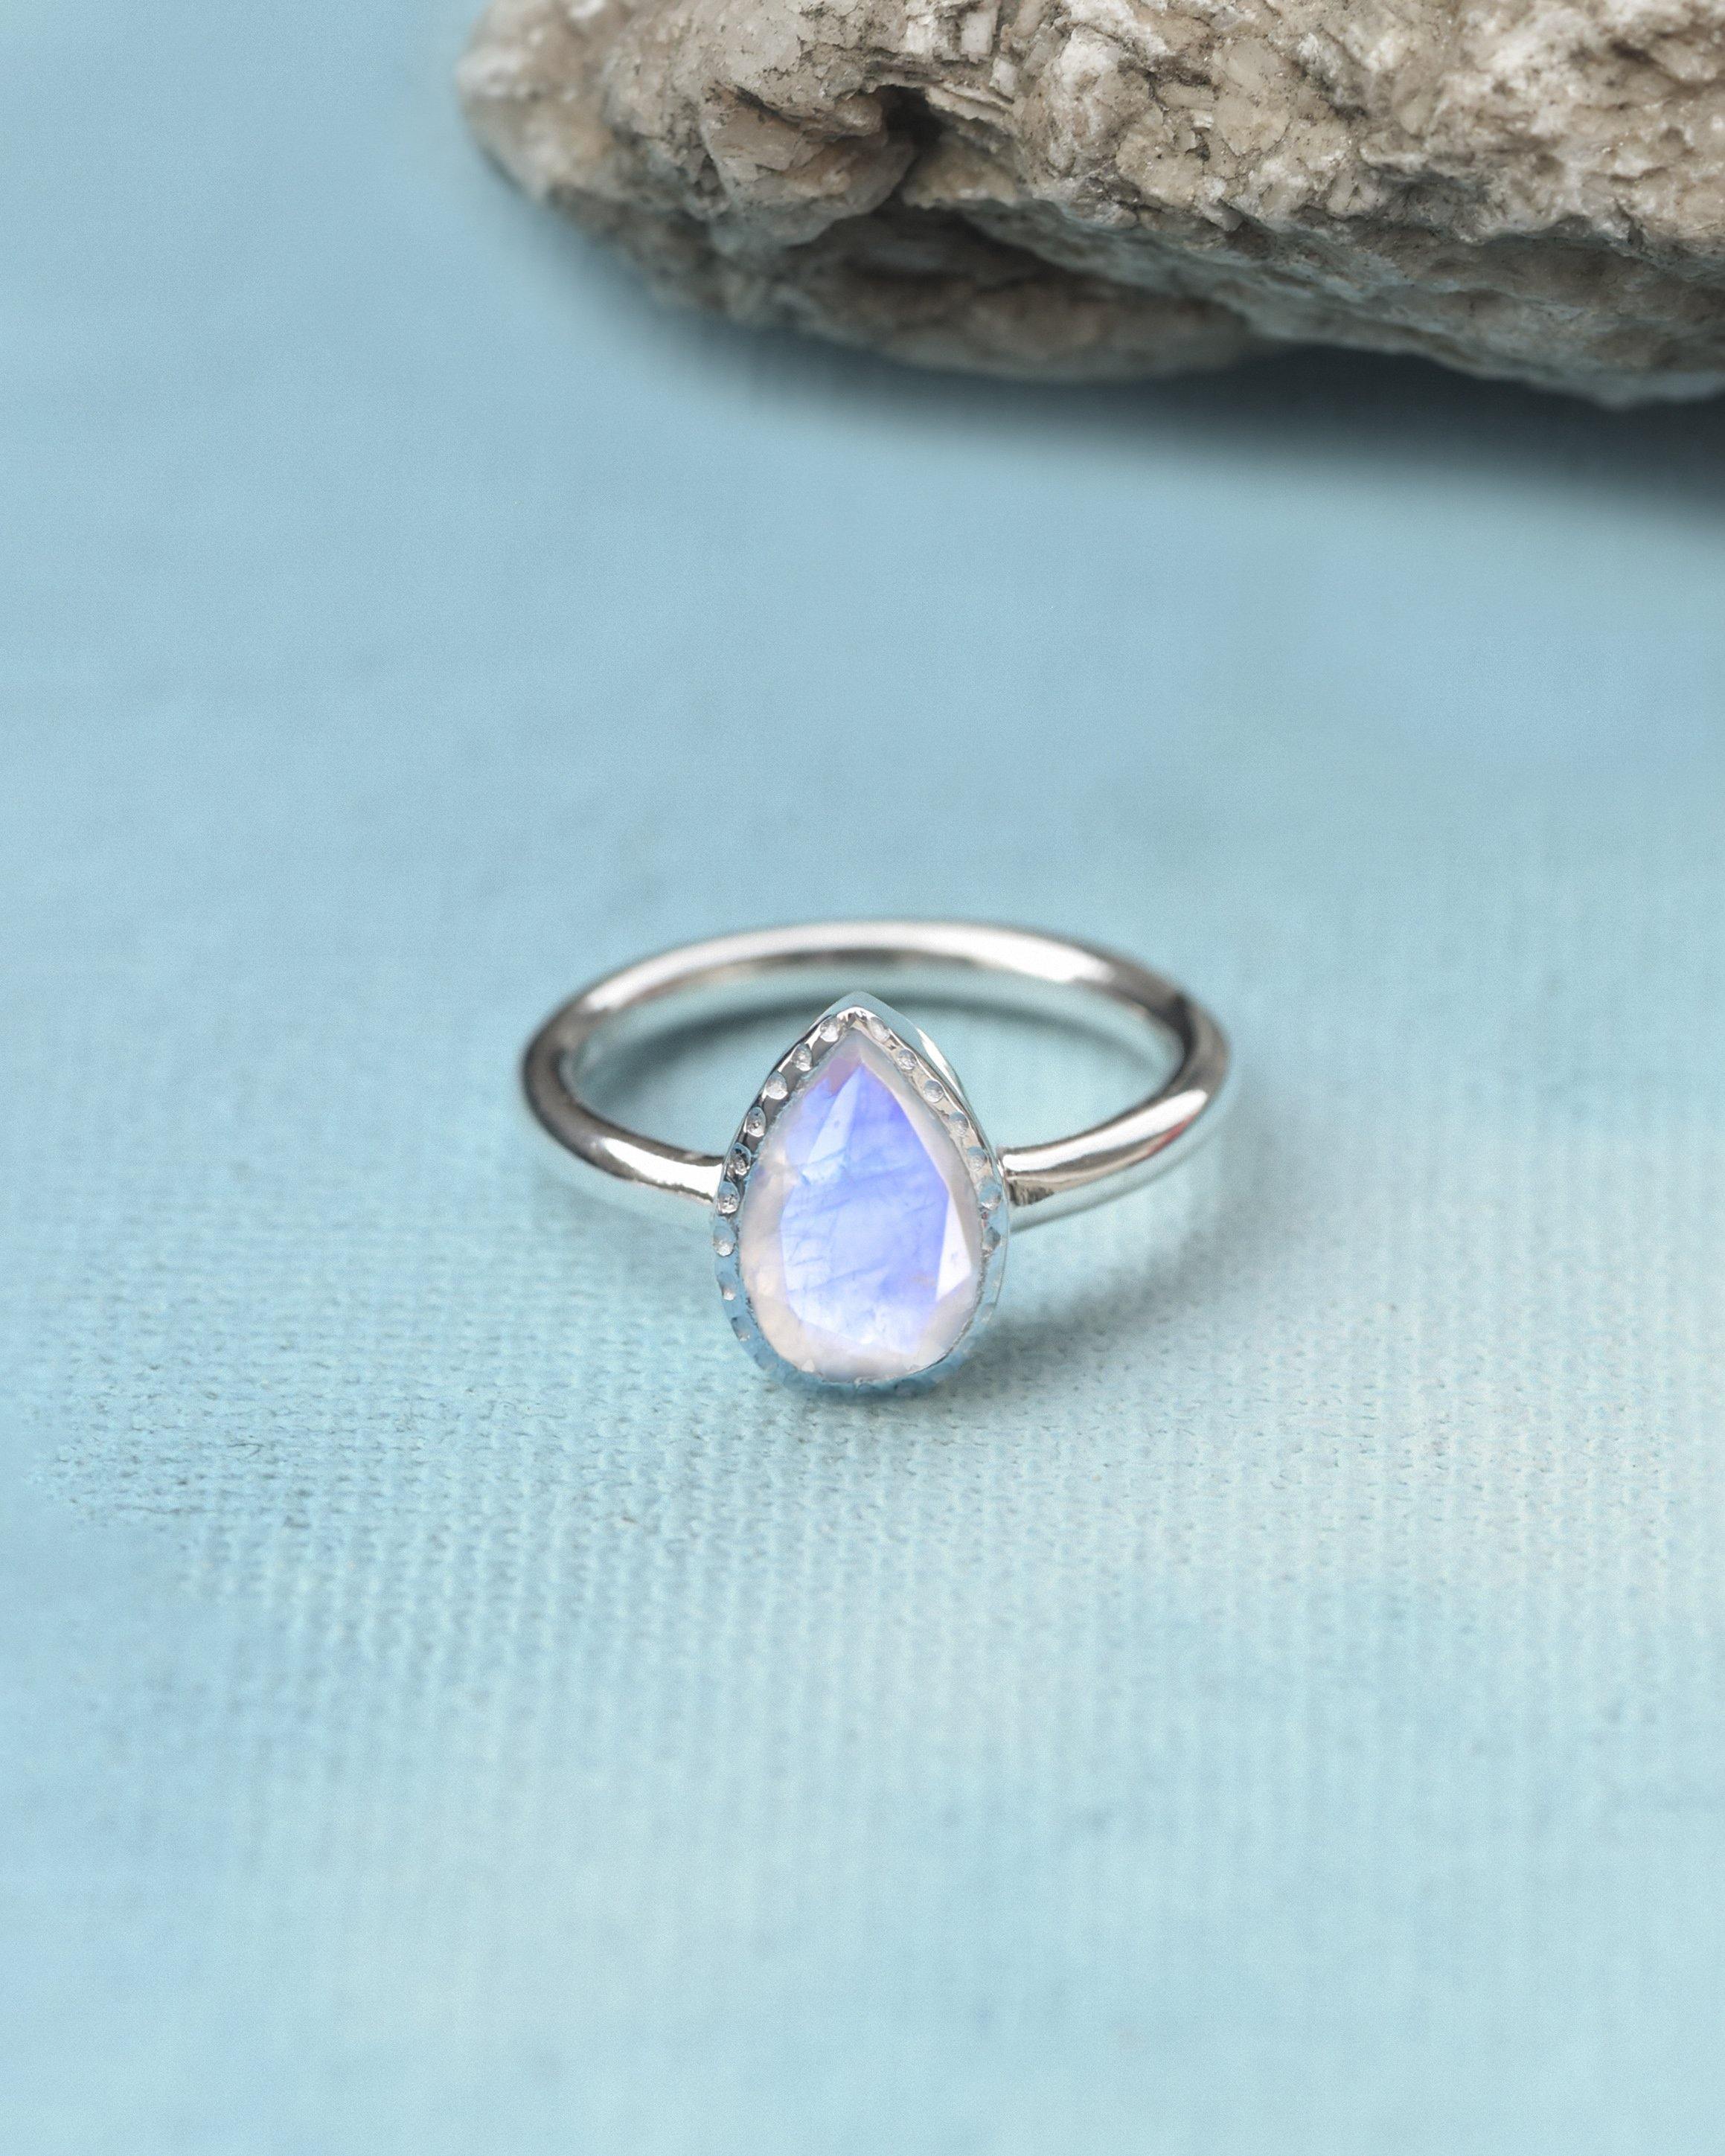 Moonstone Solid 925 Sterling Silver Gemstone Ring Jewelry For Women or Girls - YoTreasure